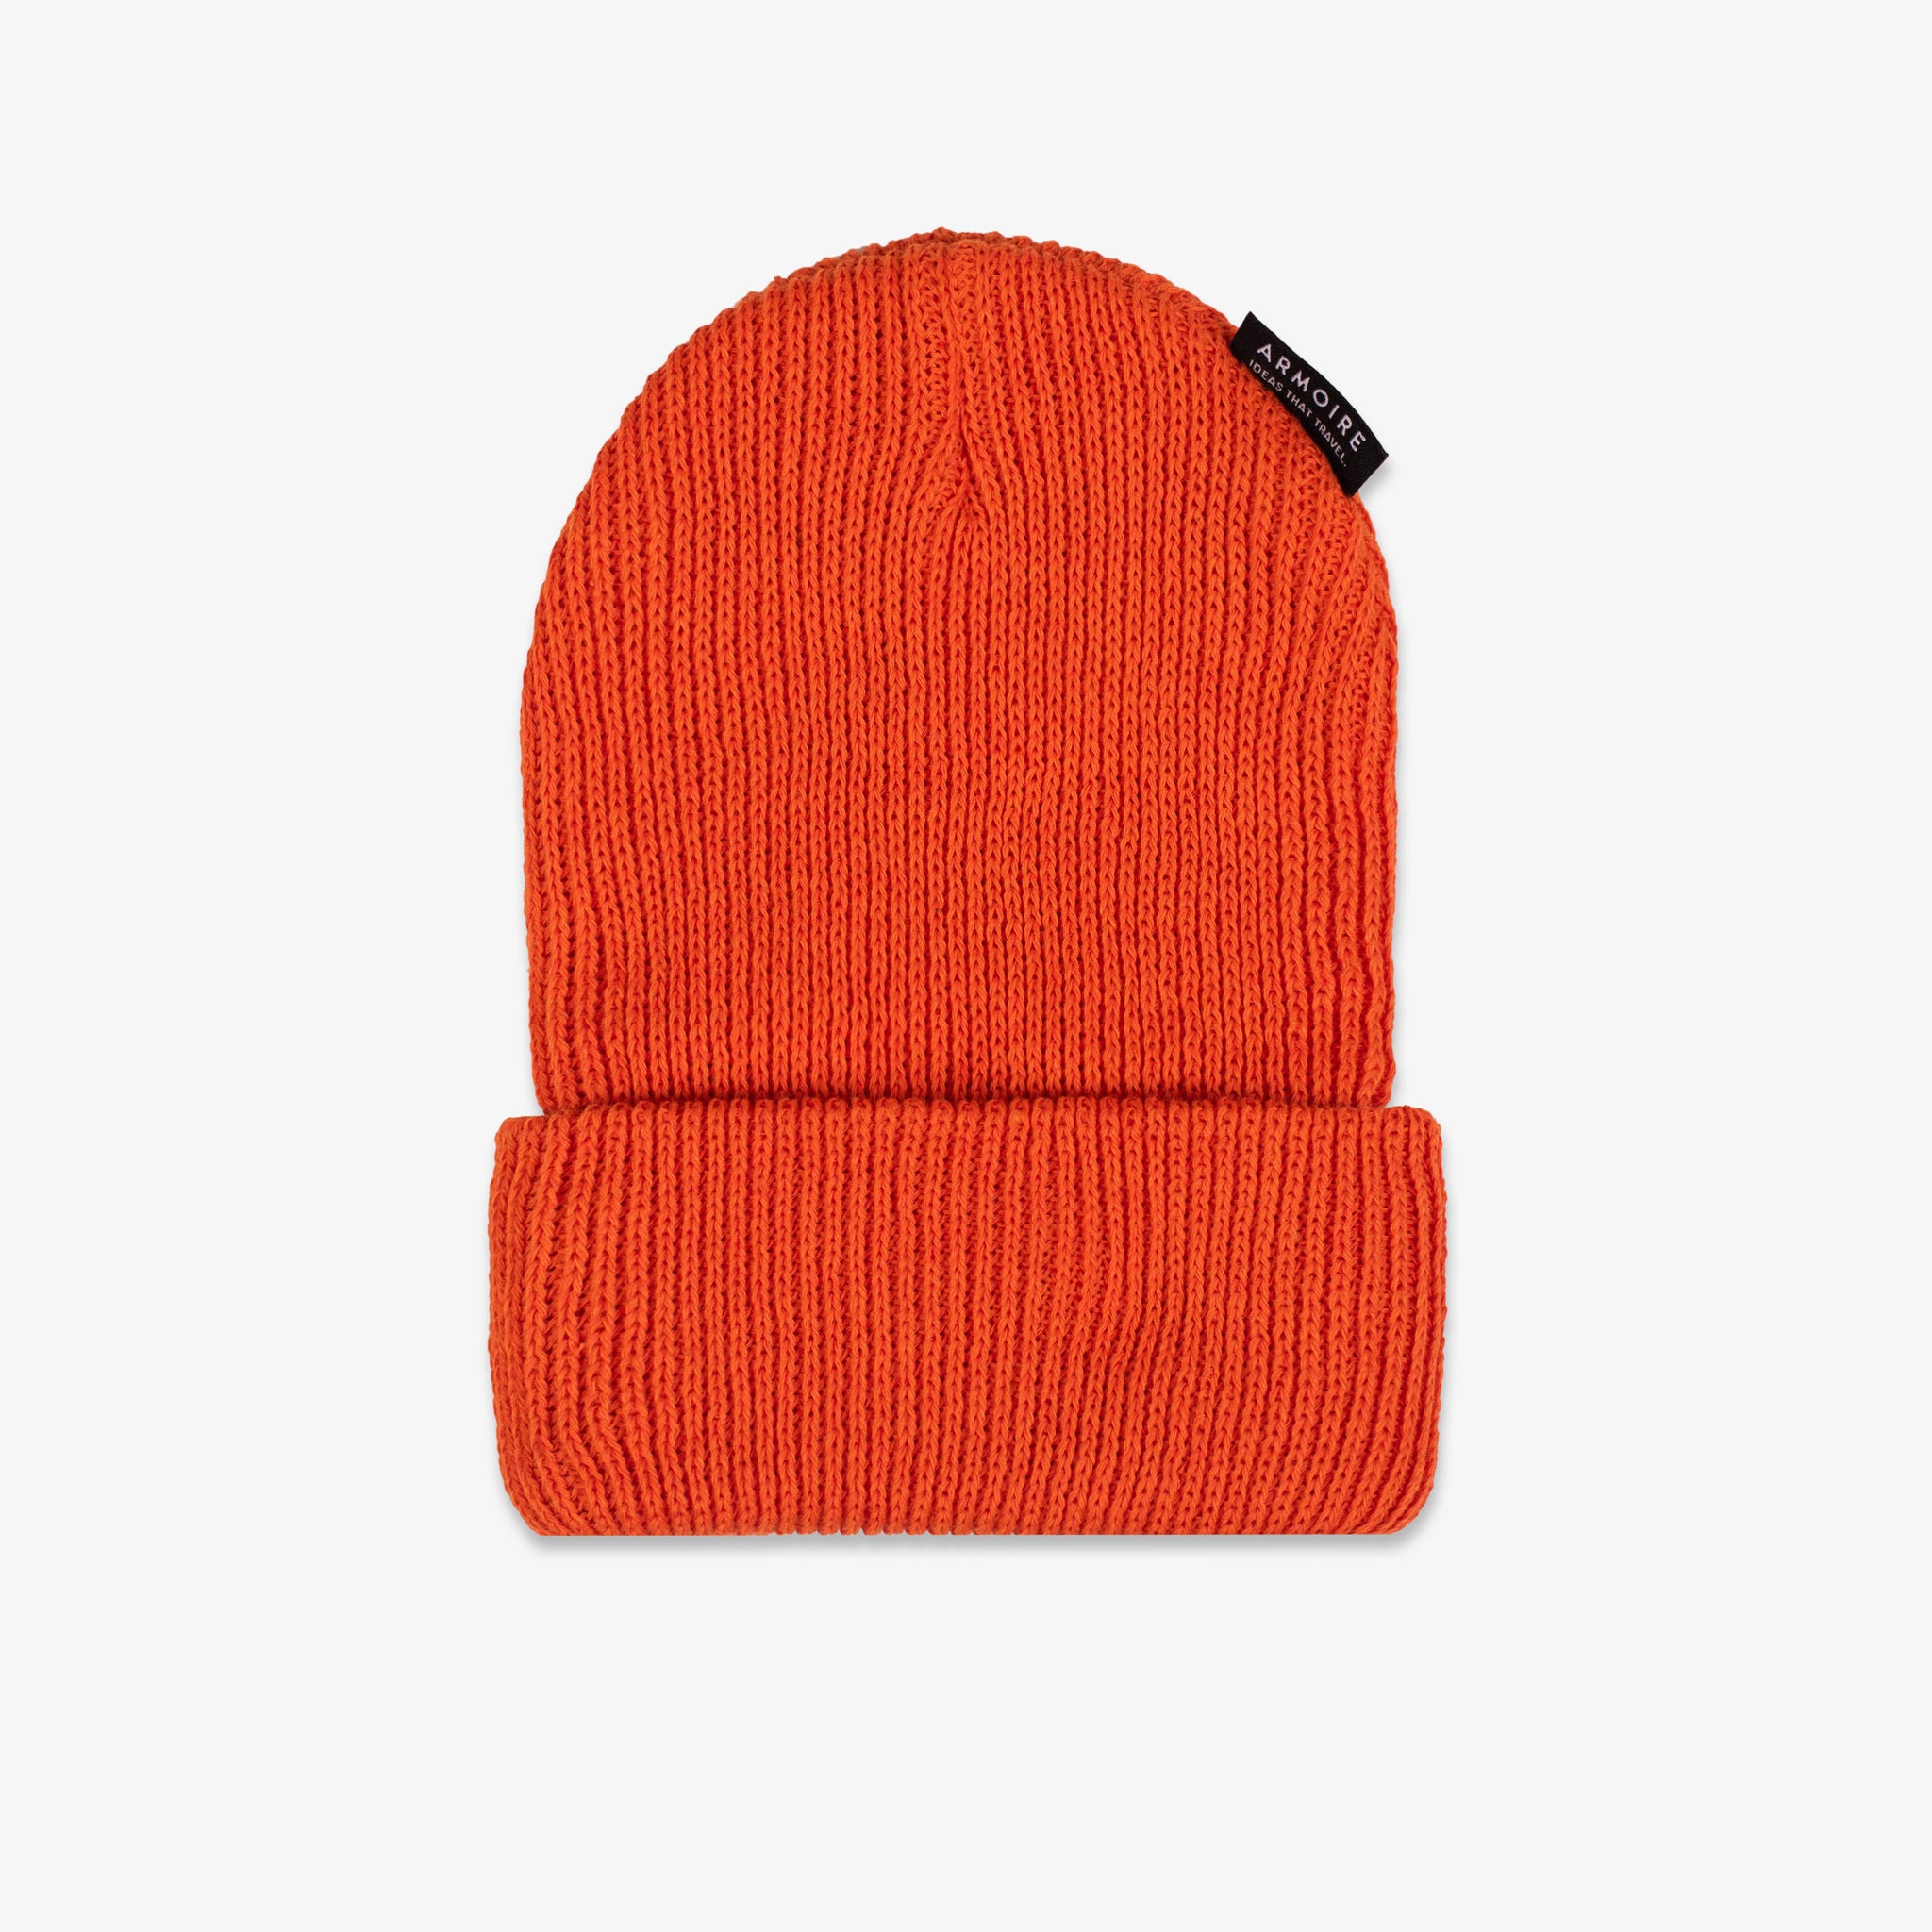 IDEAS THAT TRAVEL TUQUE